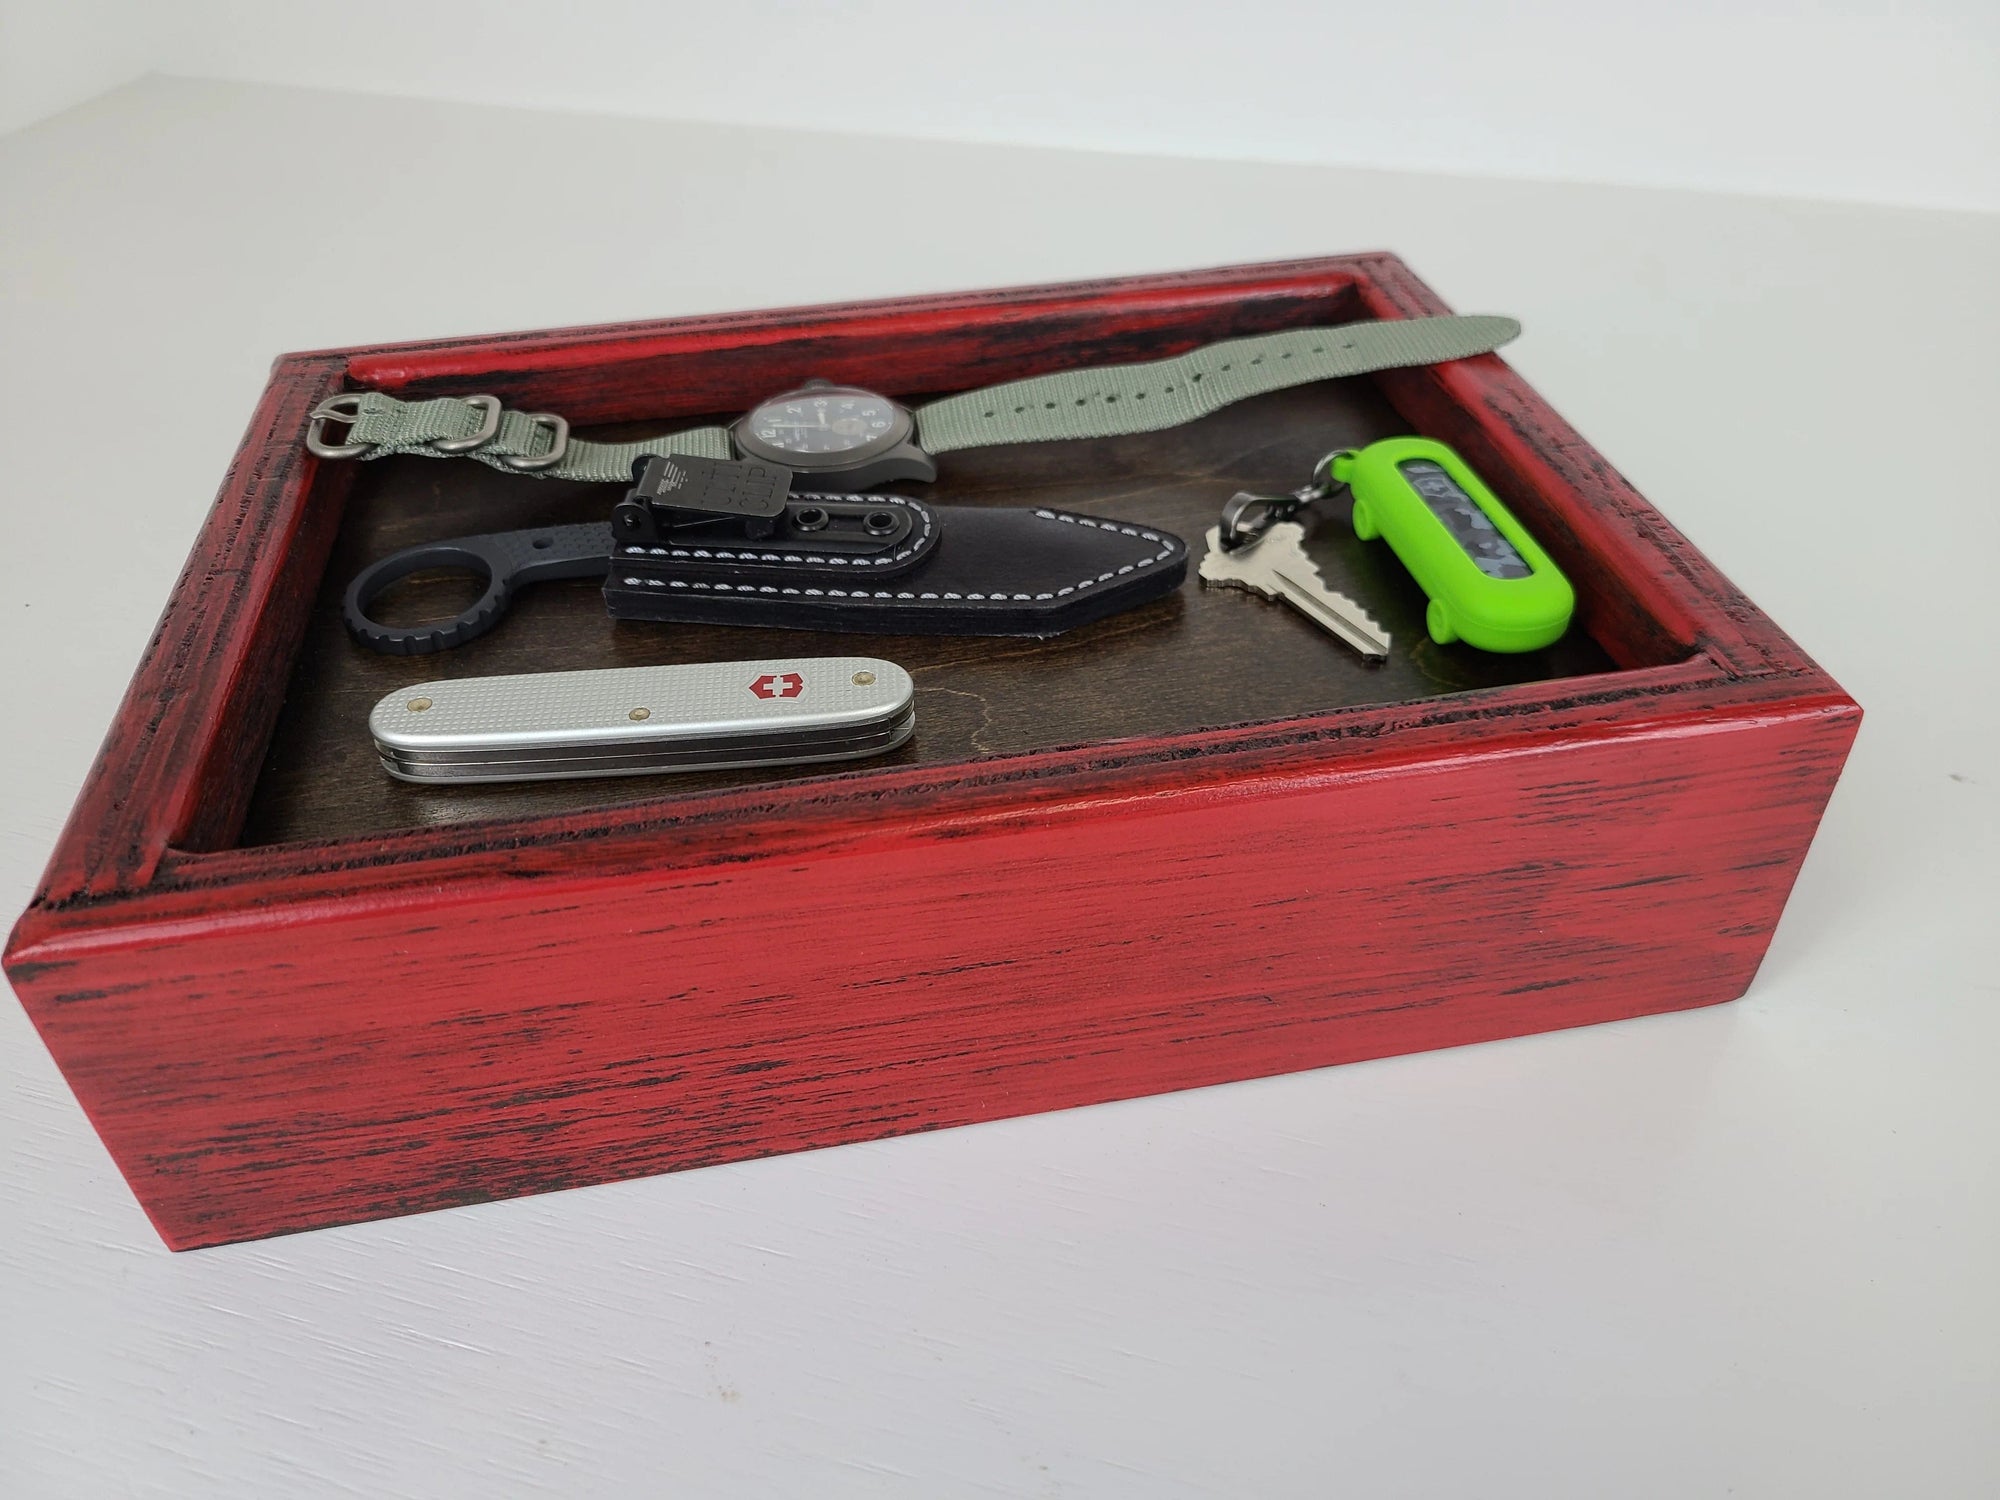 Secret Compartment Furniture, Edc Storage, Everyday Carry Cabinet